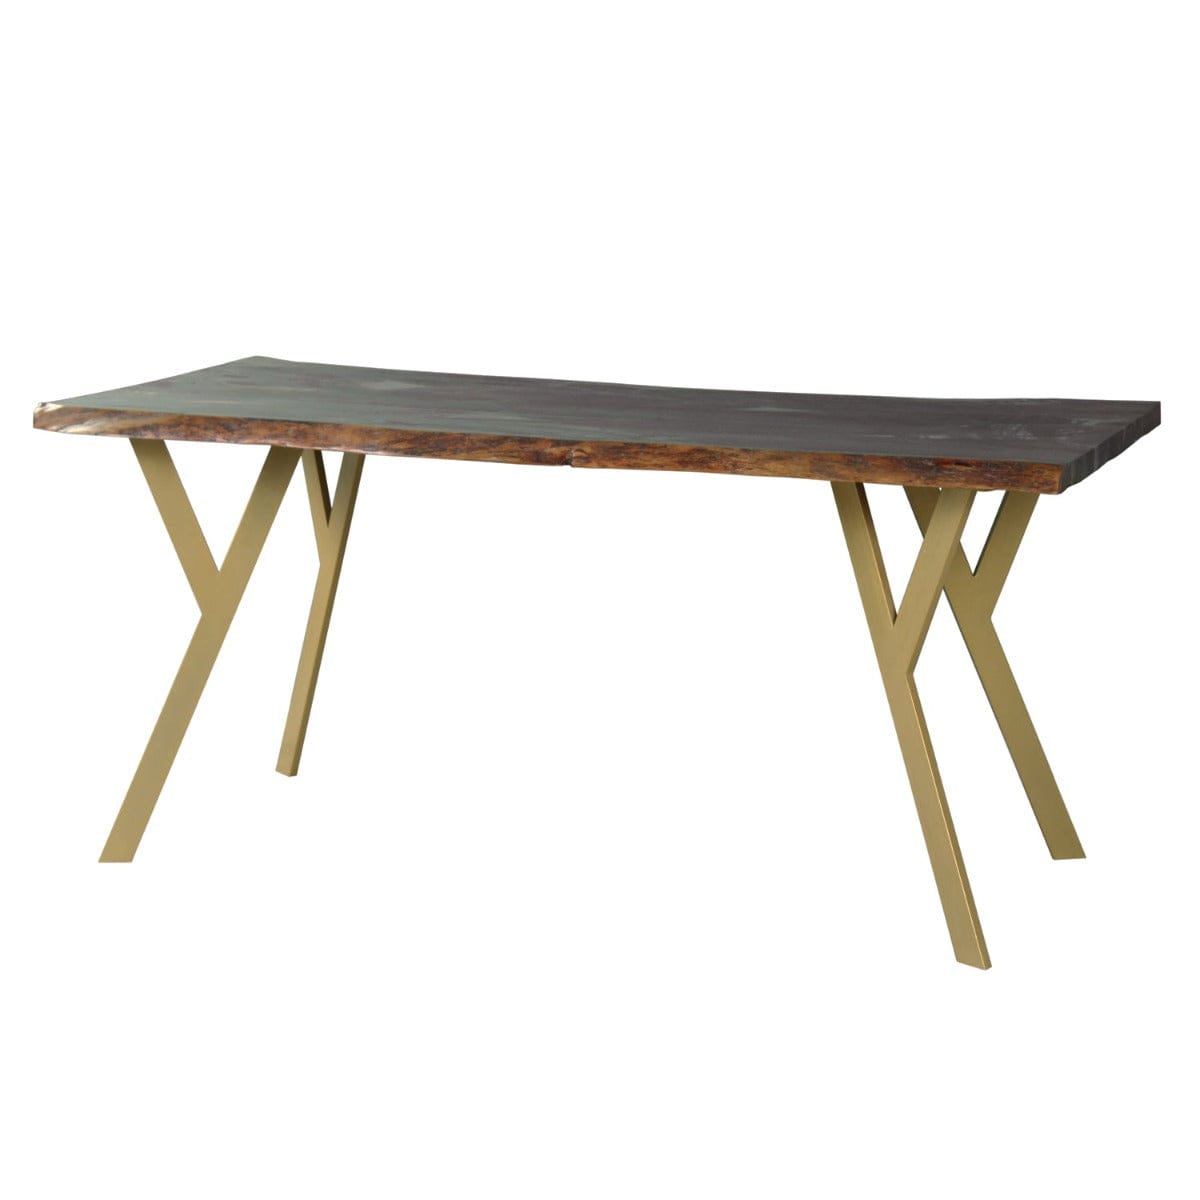 Kir 6 Seater Wooden Dining Table In Gold Finish